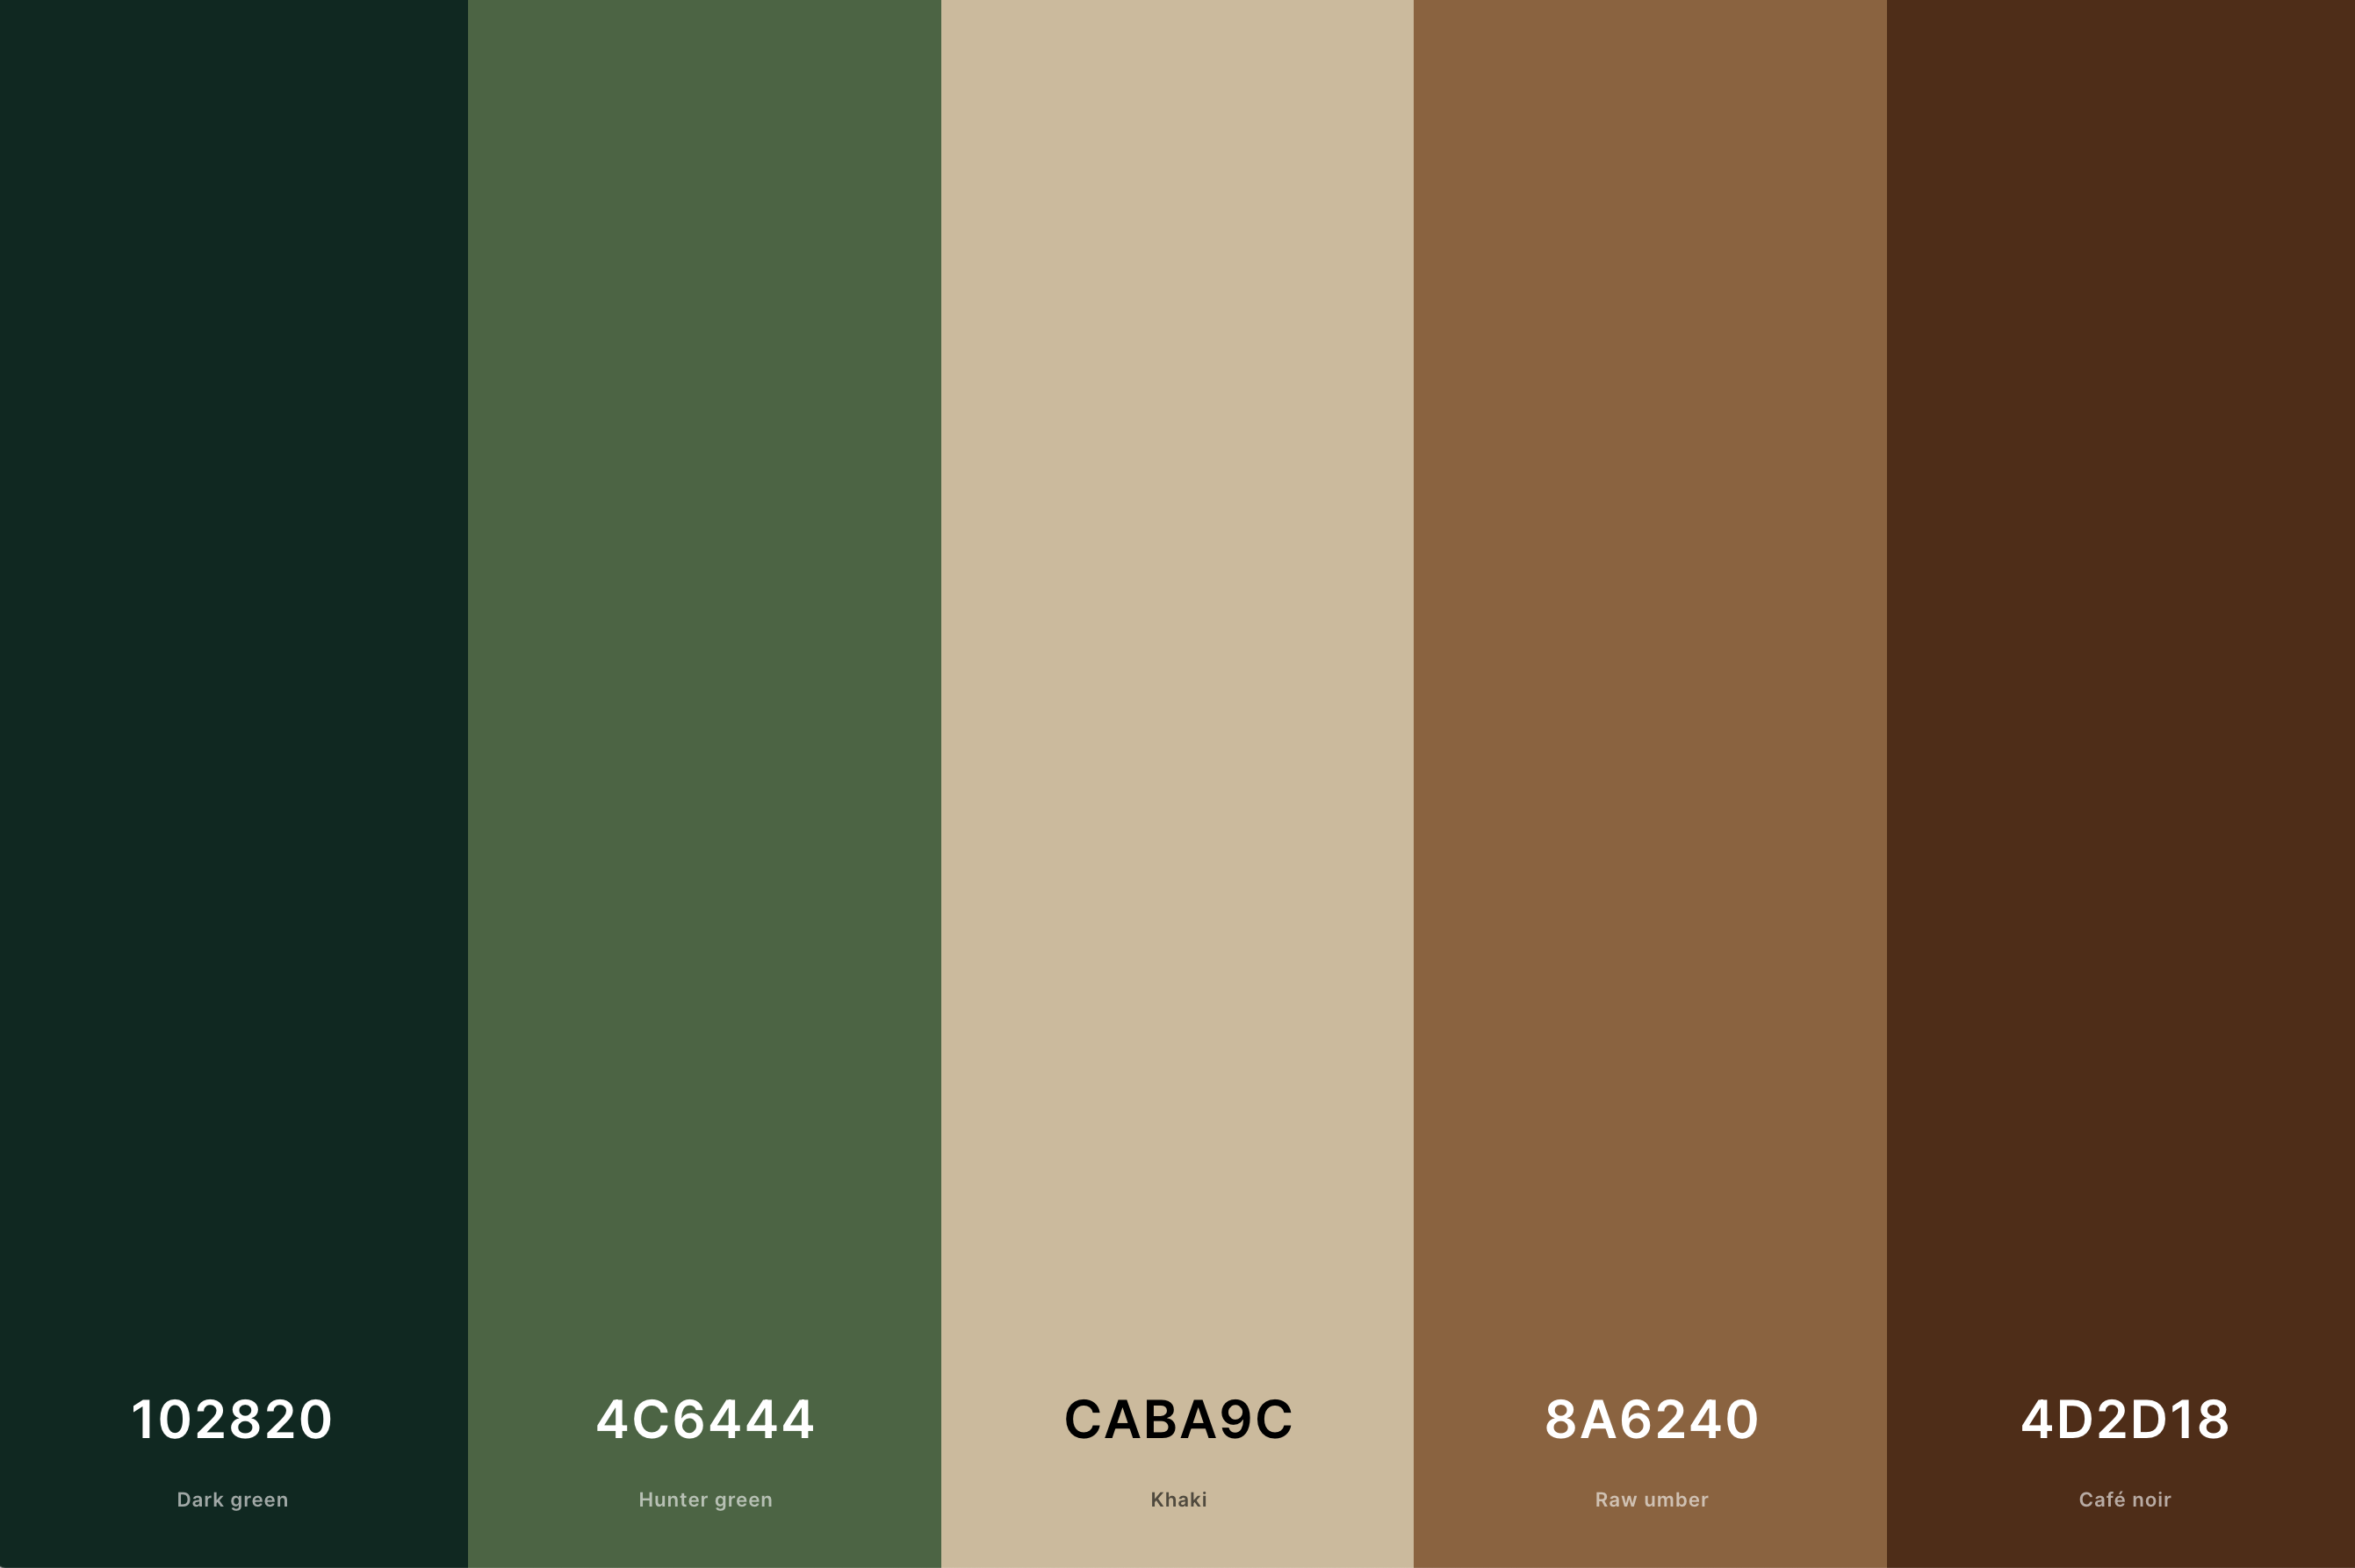 Rustic Brown & Green Color Palette Color Palette with Dark Green (Hex #102820) + Hunter Green (Hex #4C6444) + Khaki (Hex #CABA9C) + Raw Umber (Hex #8A6240) + Café Noir (Hex #4D2D18) Color Palette with Hex Codes